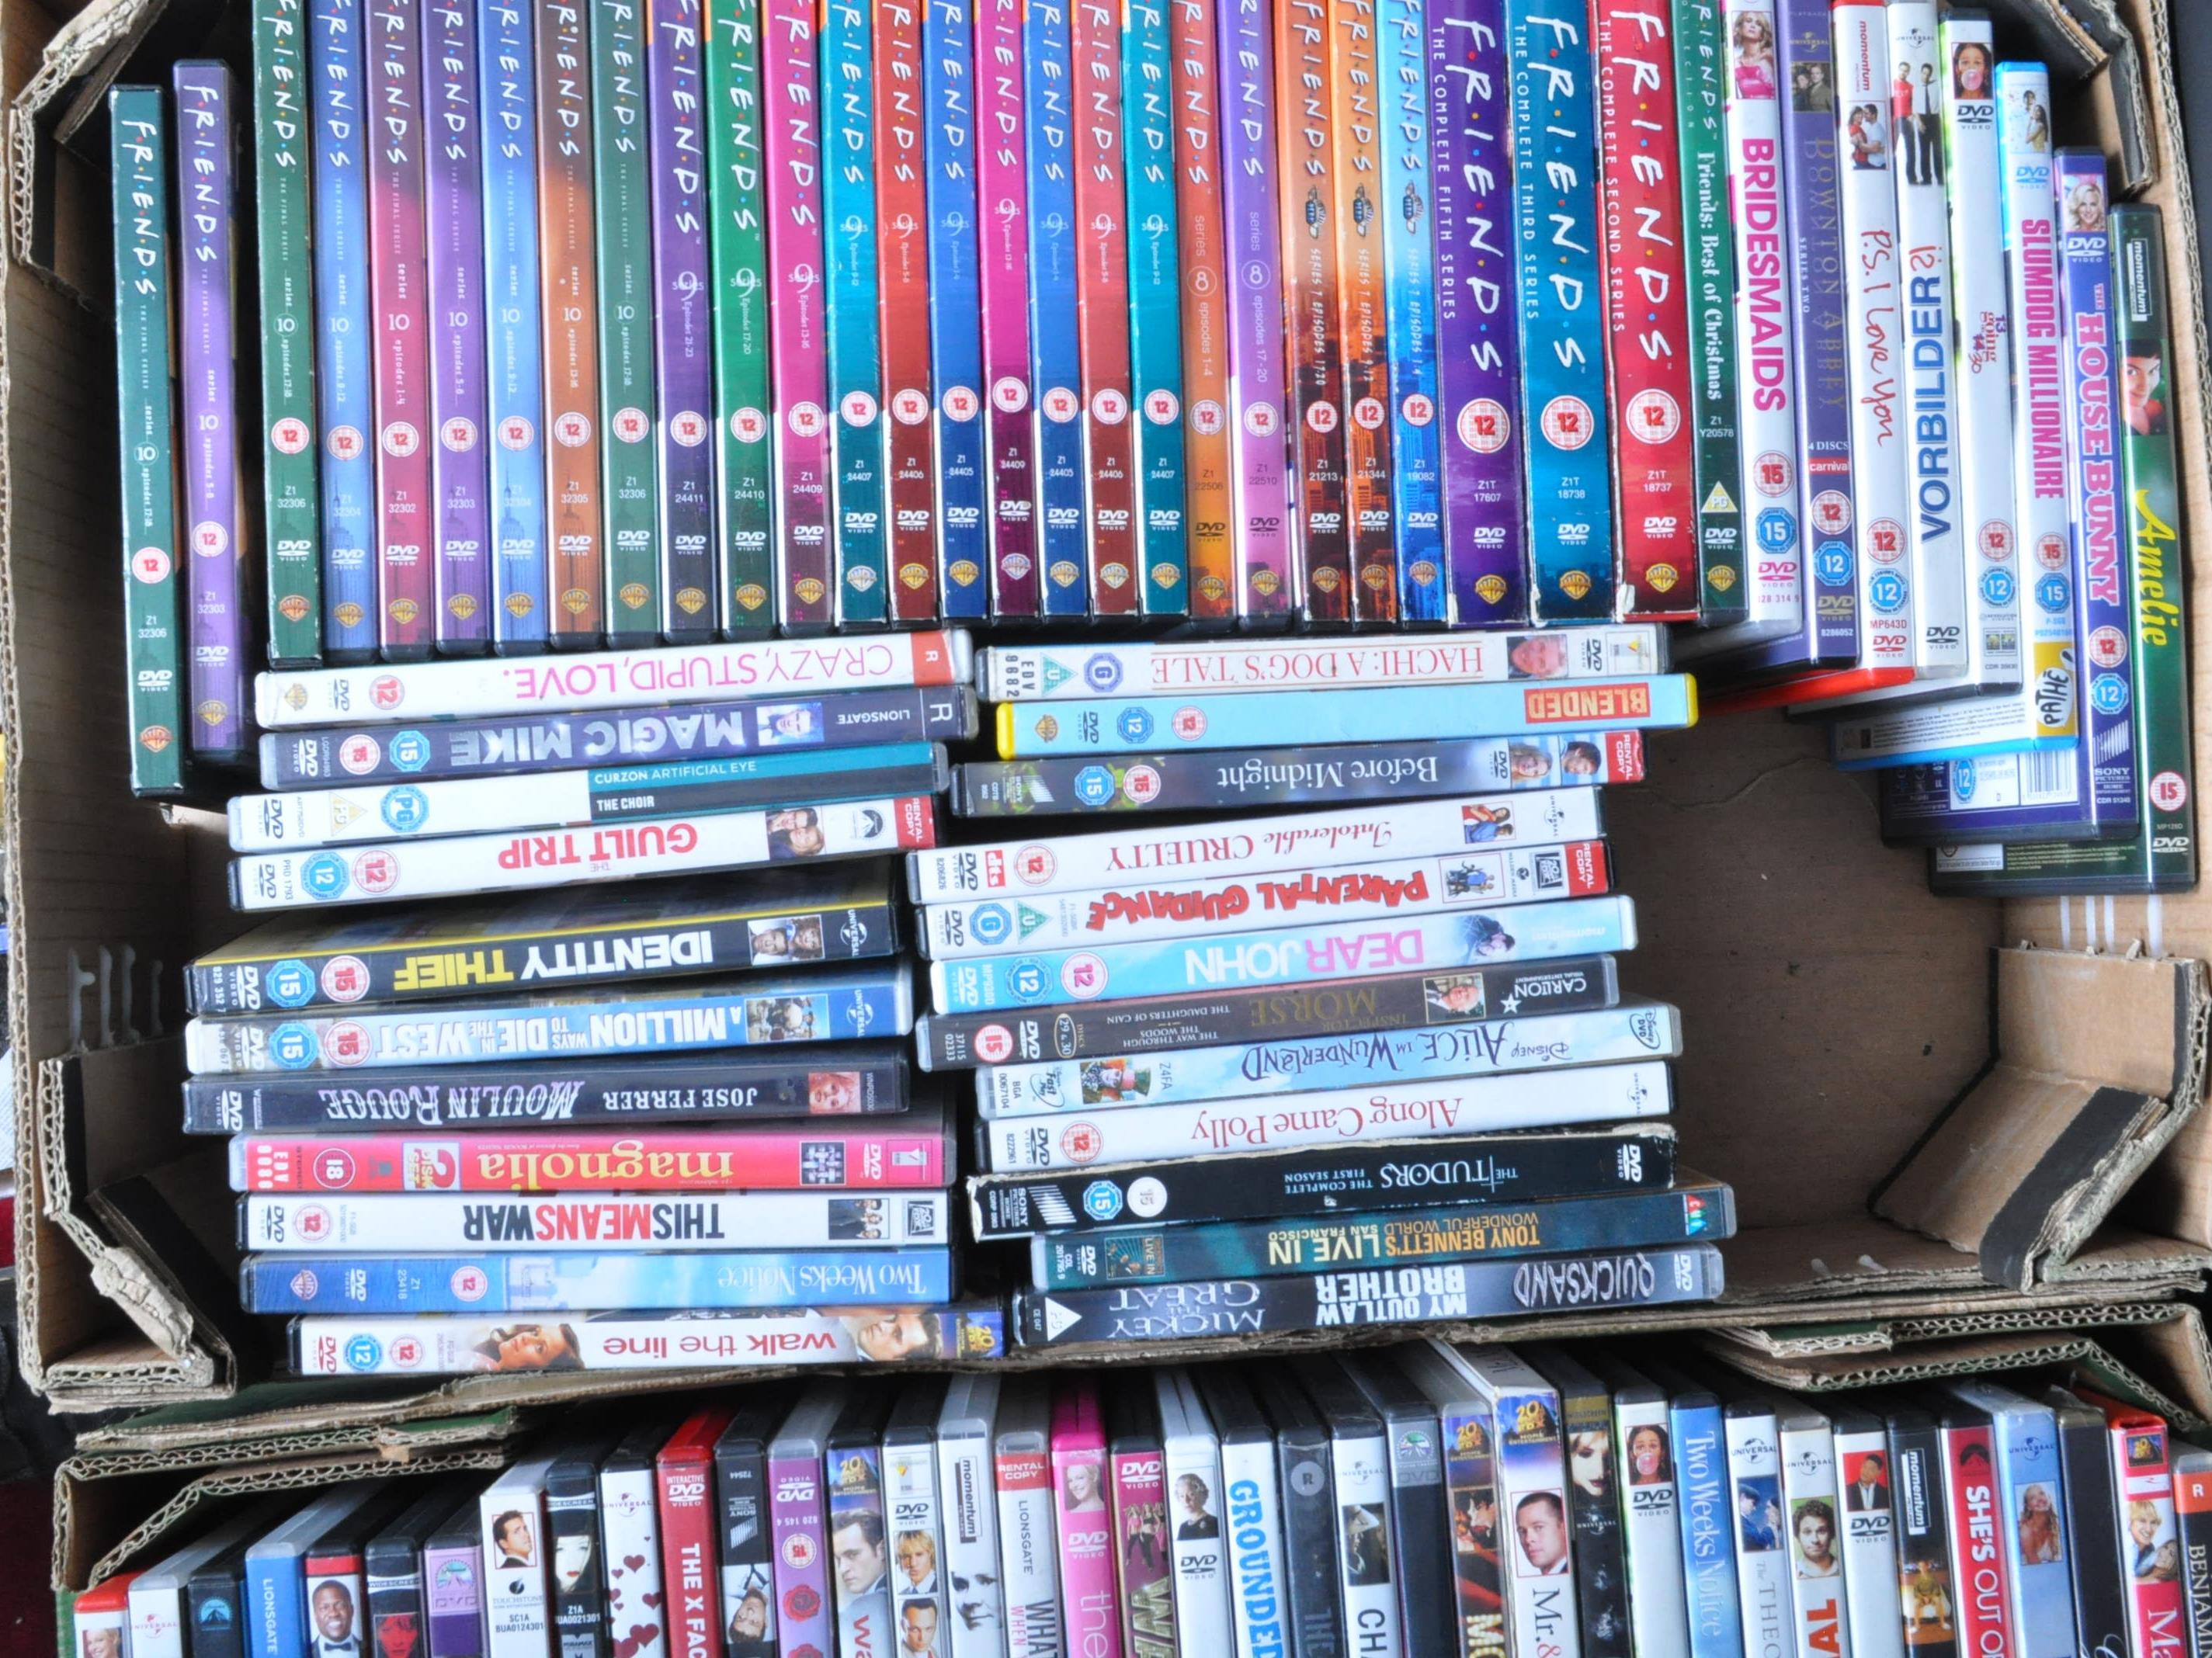 LARGE COLLECTION OF DVD FILMS - 'CHICK FLICK' GENRE & MORE